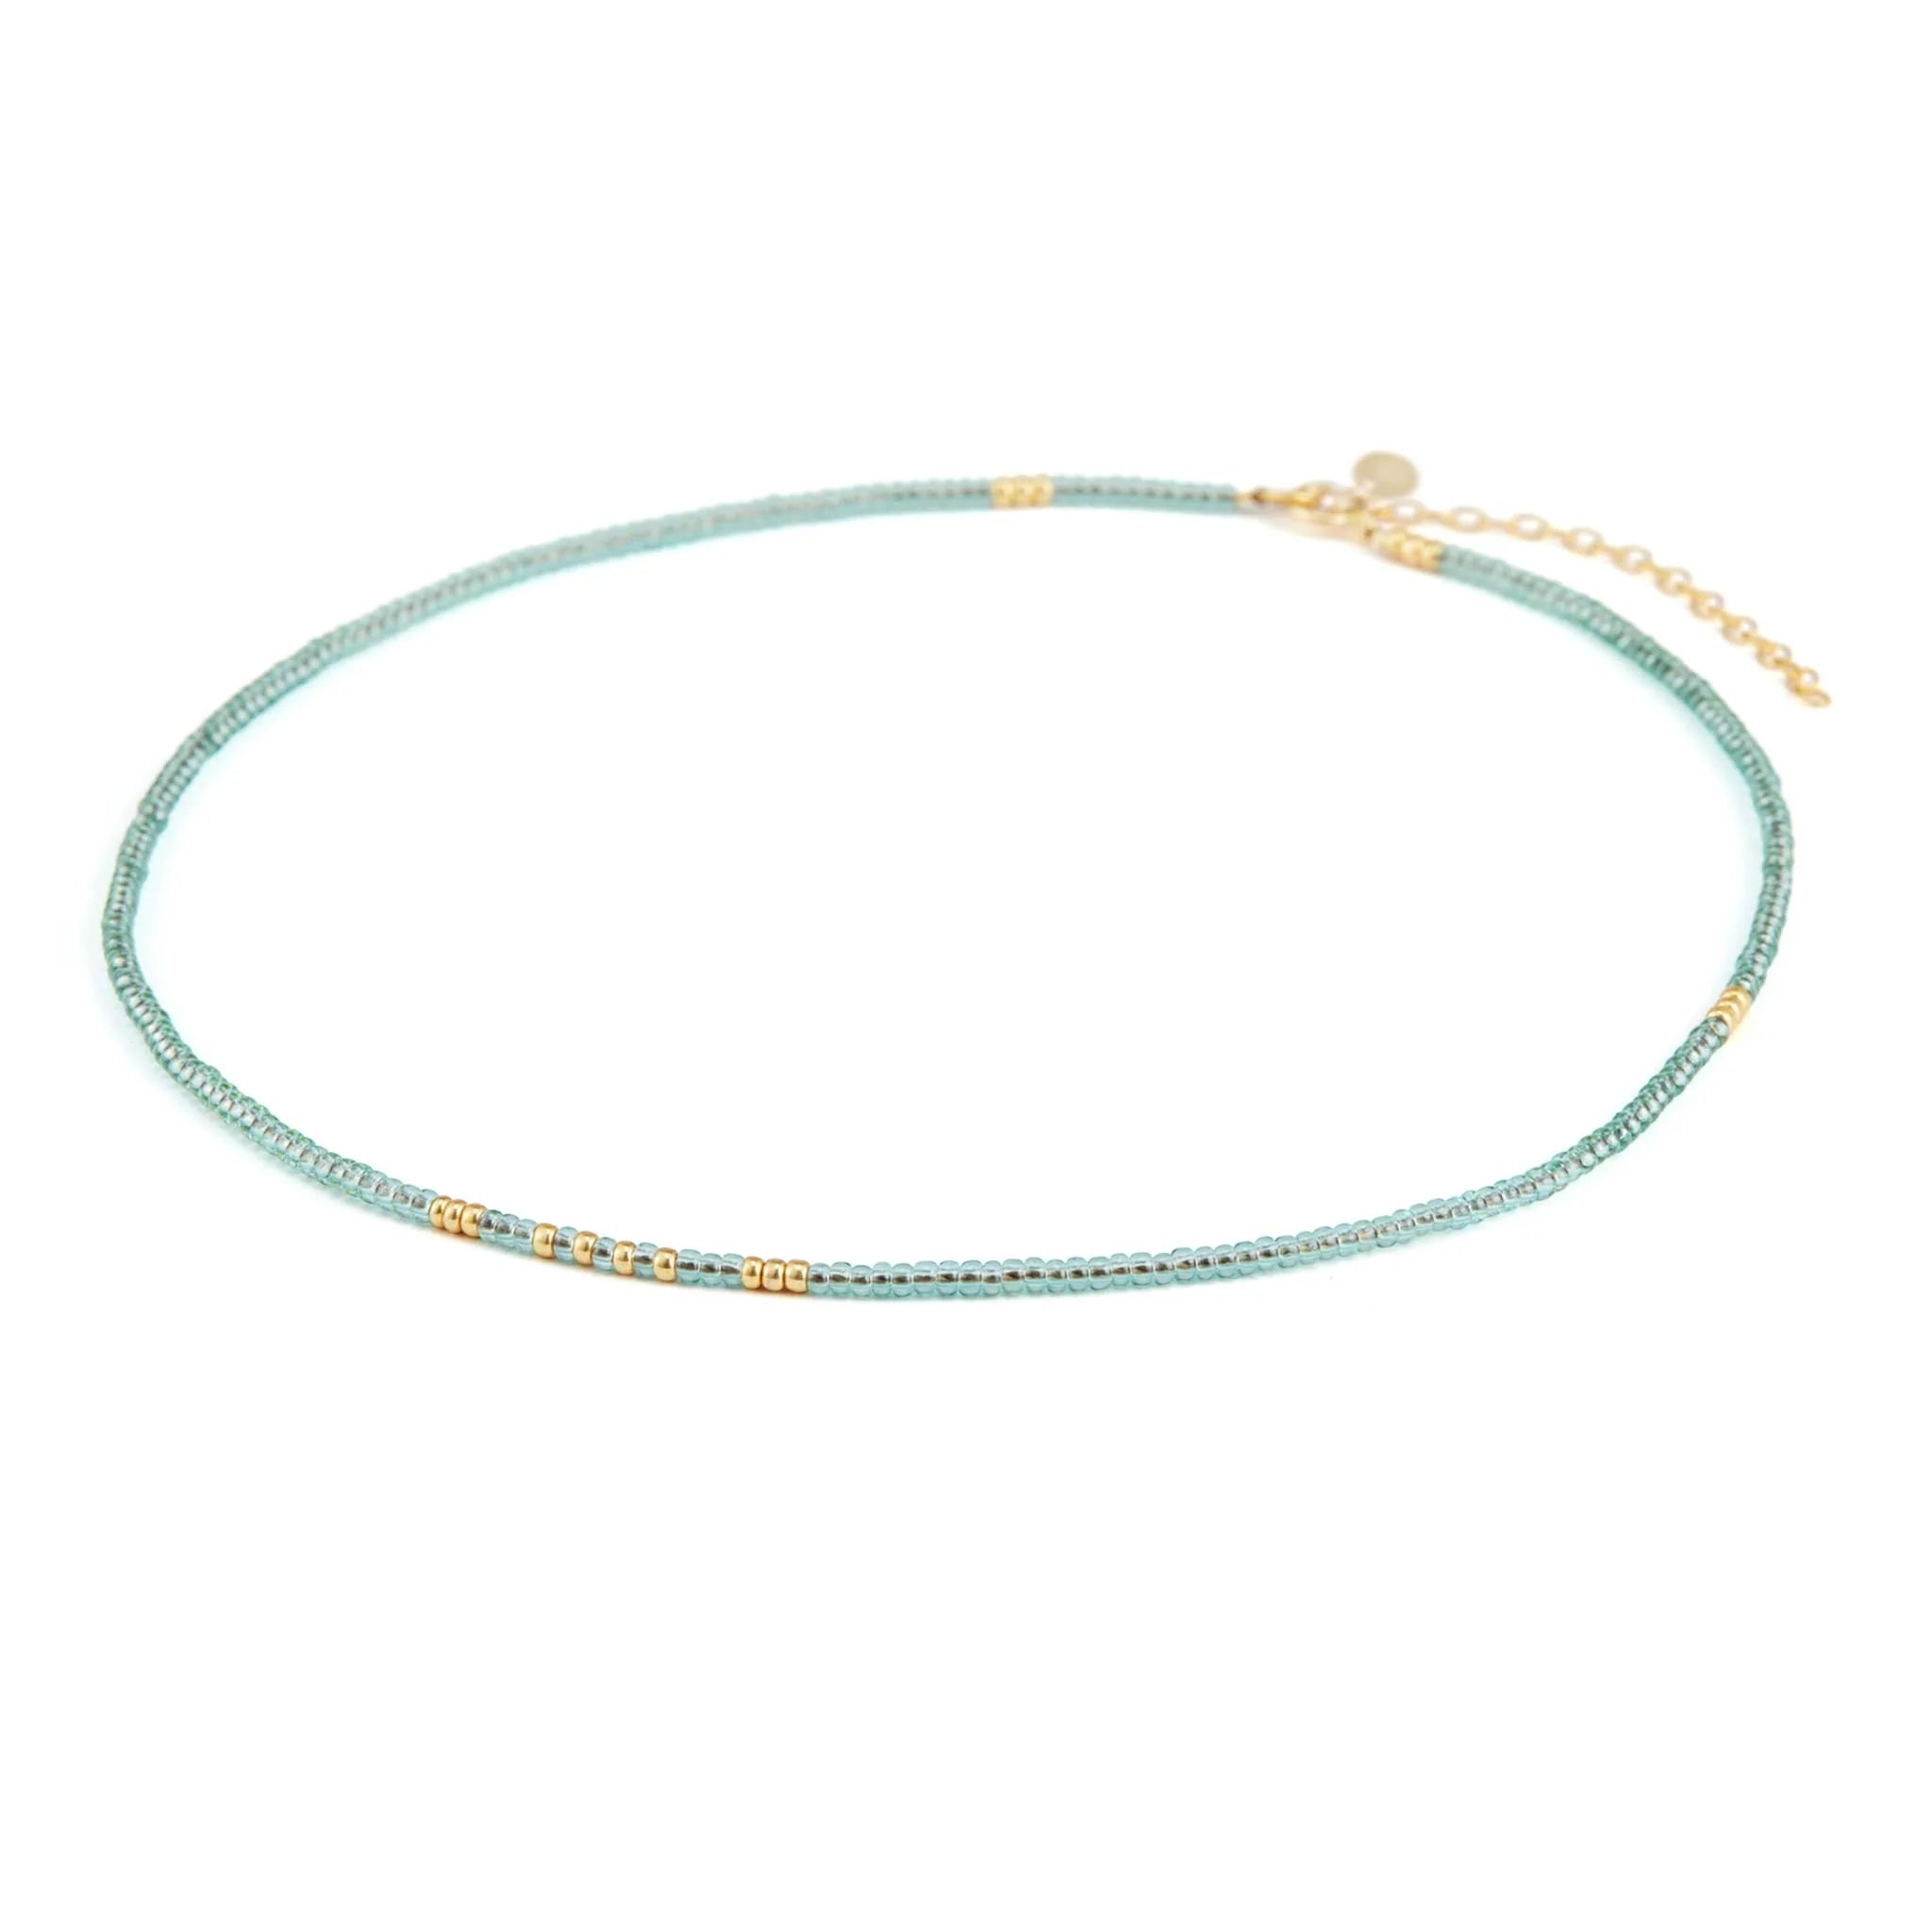 Water Blue Beaded Necklace - Wanderlust Life